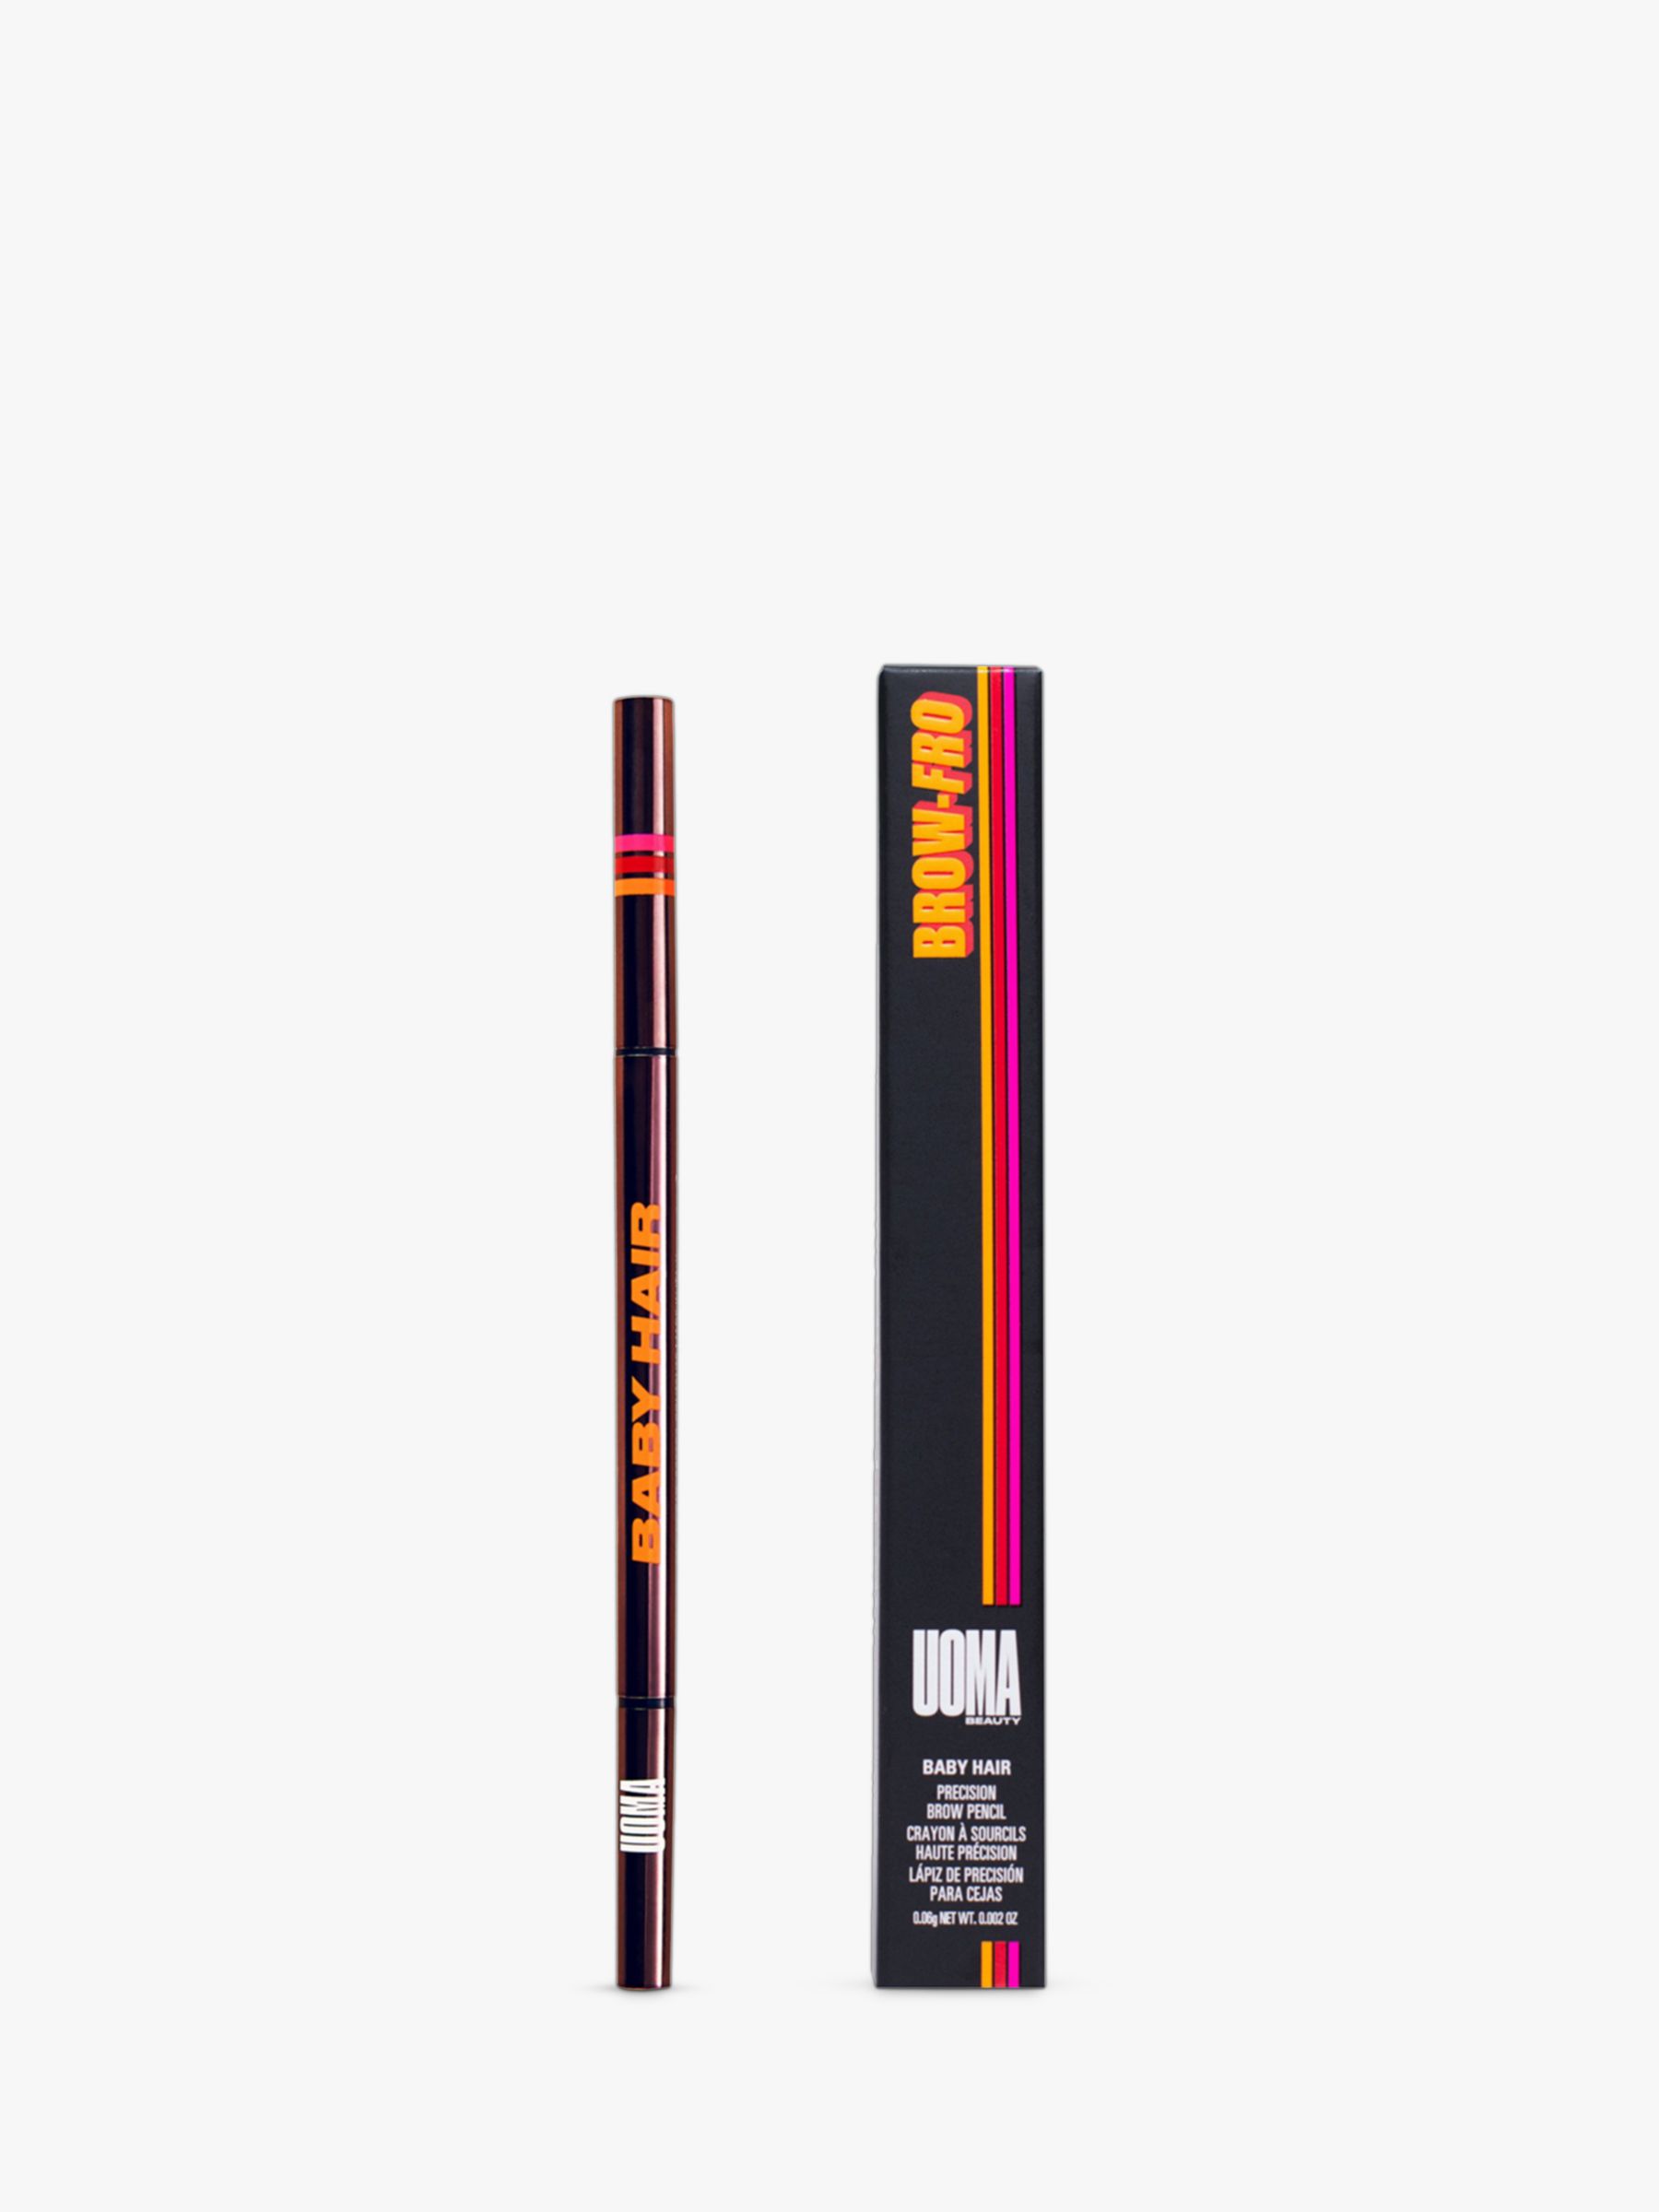 UOMA Beauty BROW-FRO BABY HAIR Brow Pencil, 02 Golden Blonde 8